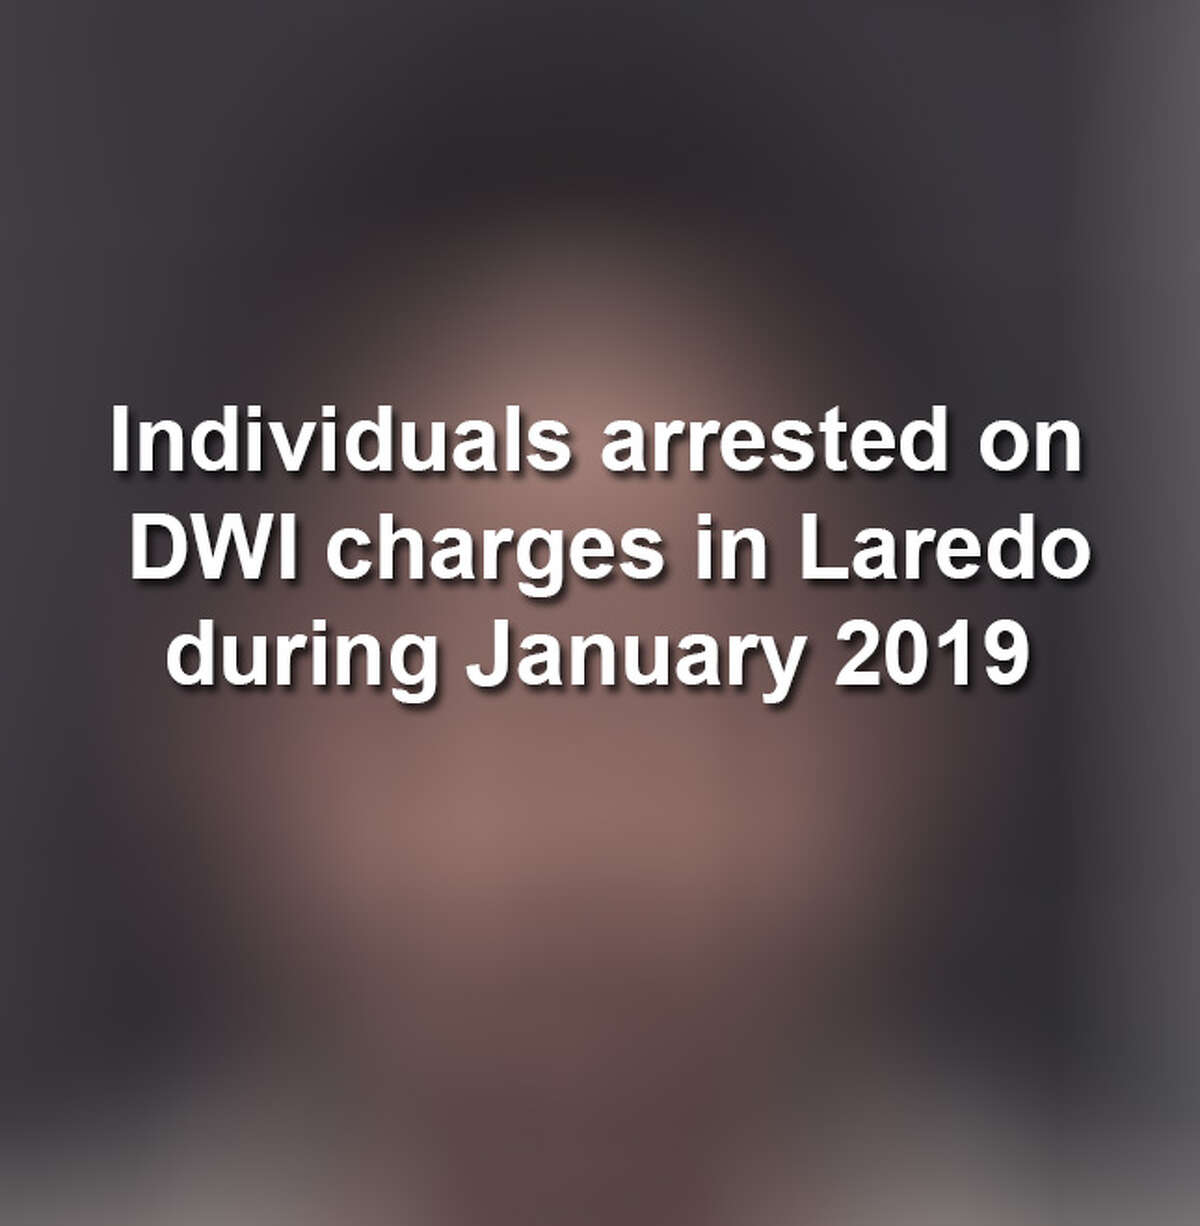 Keep scrolling to see the mugshots of individuals charged with misdemeanor and felony DWI charges last month in Laredo, according to police records.